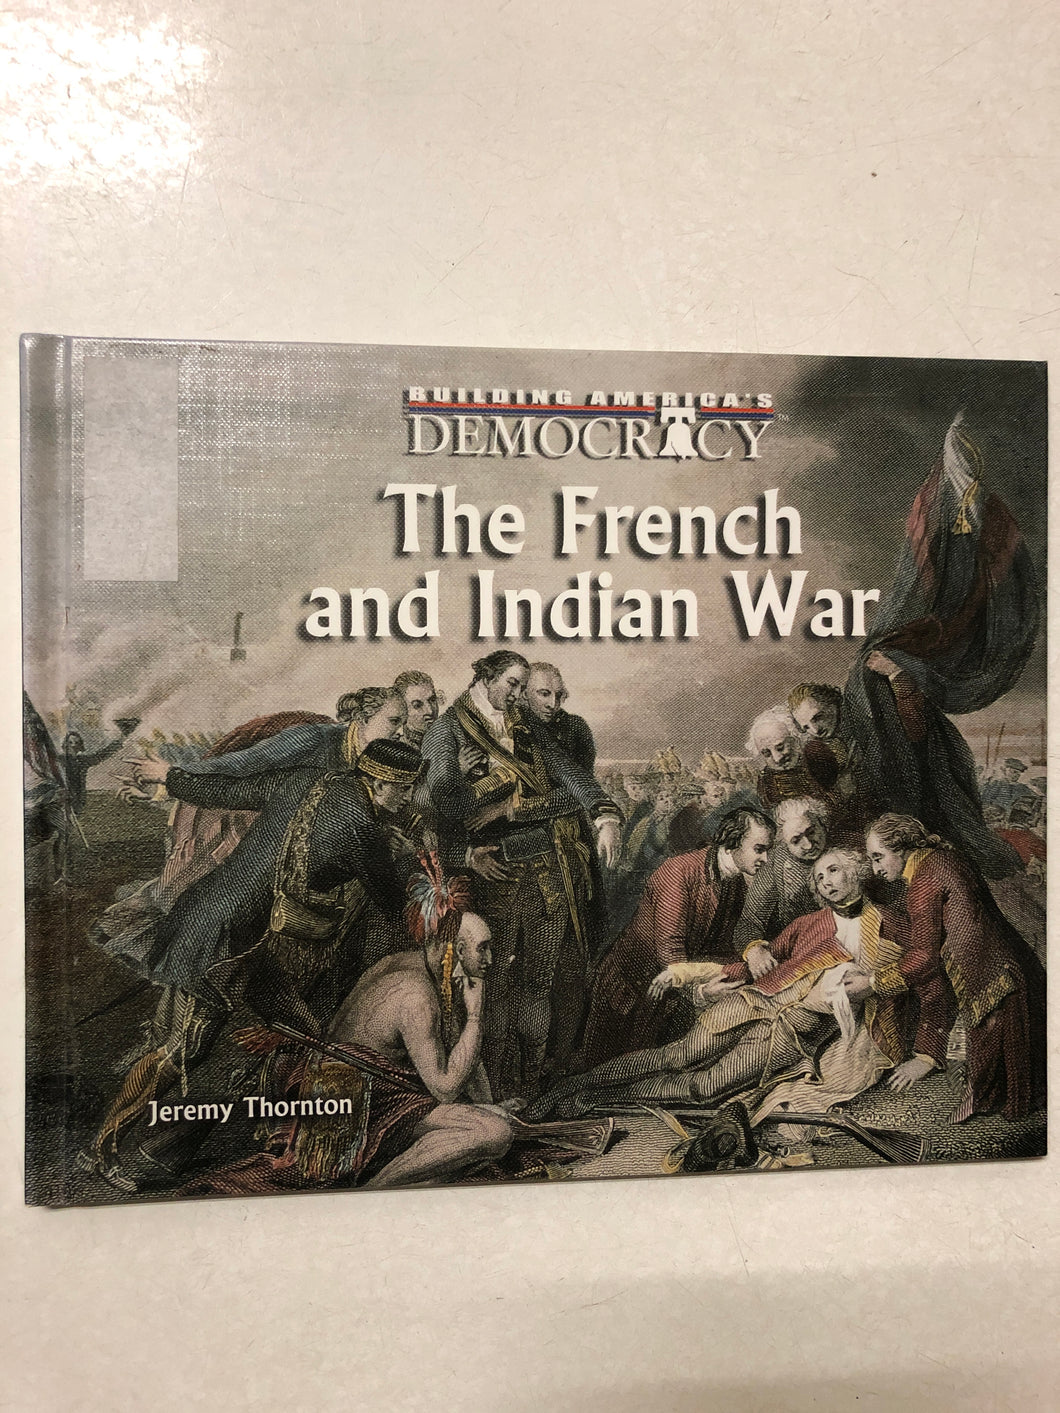 Building America’s Democracy The French and Indian War 